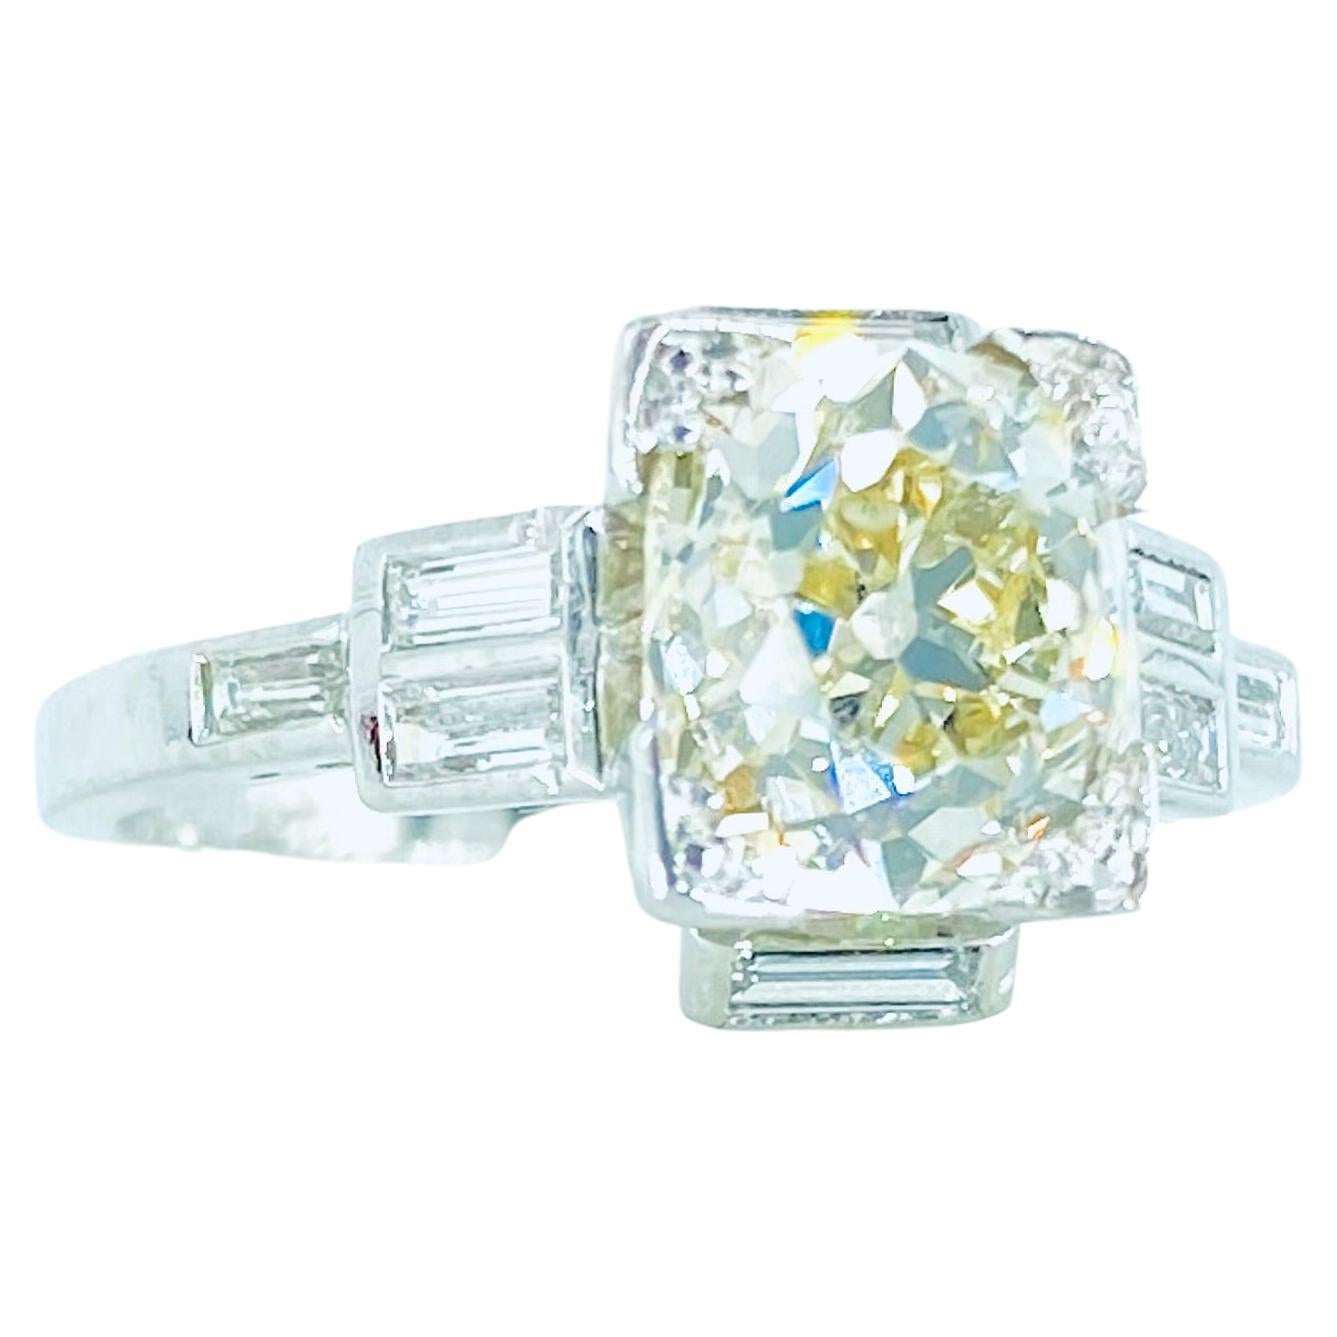 Antique Art Deco 1.94 Carat Natural Old Mine White Diamond Engagement Ring. 

Natural Center Old Mine Cut White Diamond: 1.53cts 
Color: J/K
Clarity: SI
Total # Of Stones: 1 
Cut: Old Mine (7.24x6.36mm) 

Natural Side Baguette Cut White Diamonds: